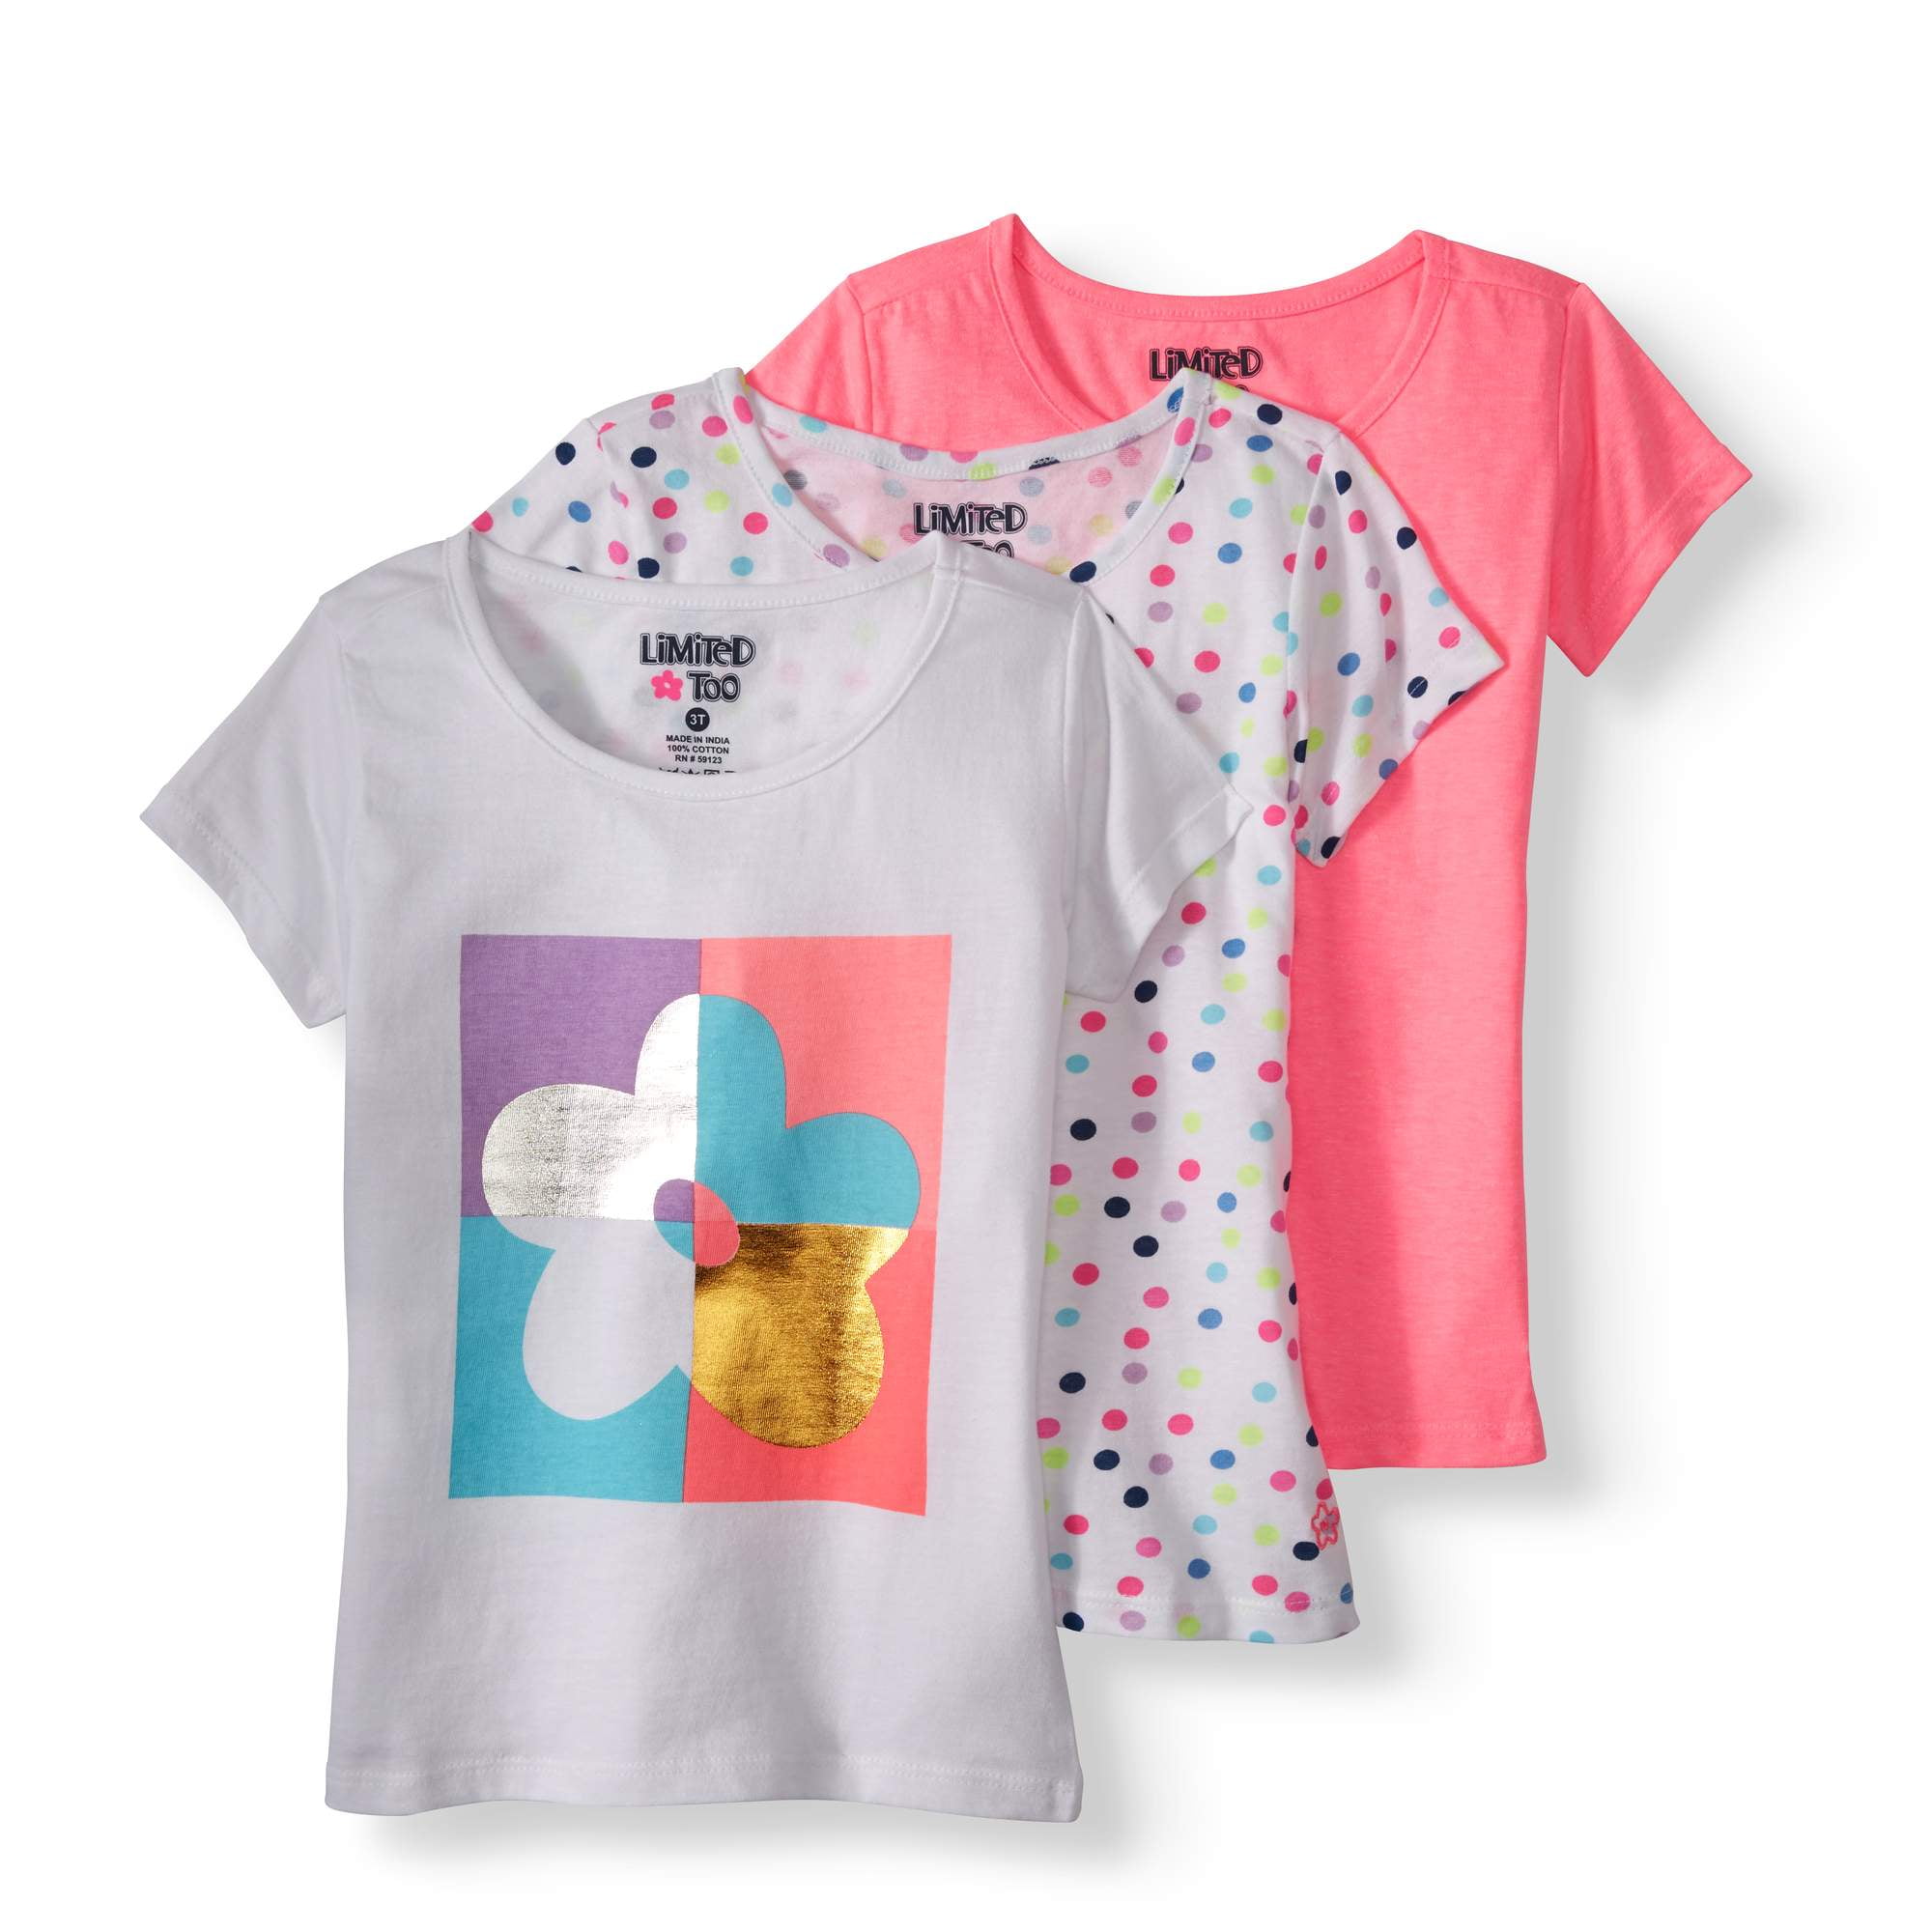 Baby Toddler Girl Graphic T-shirts, 3-pack - Walmart.com